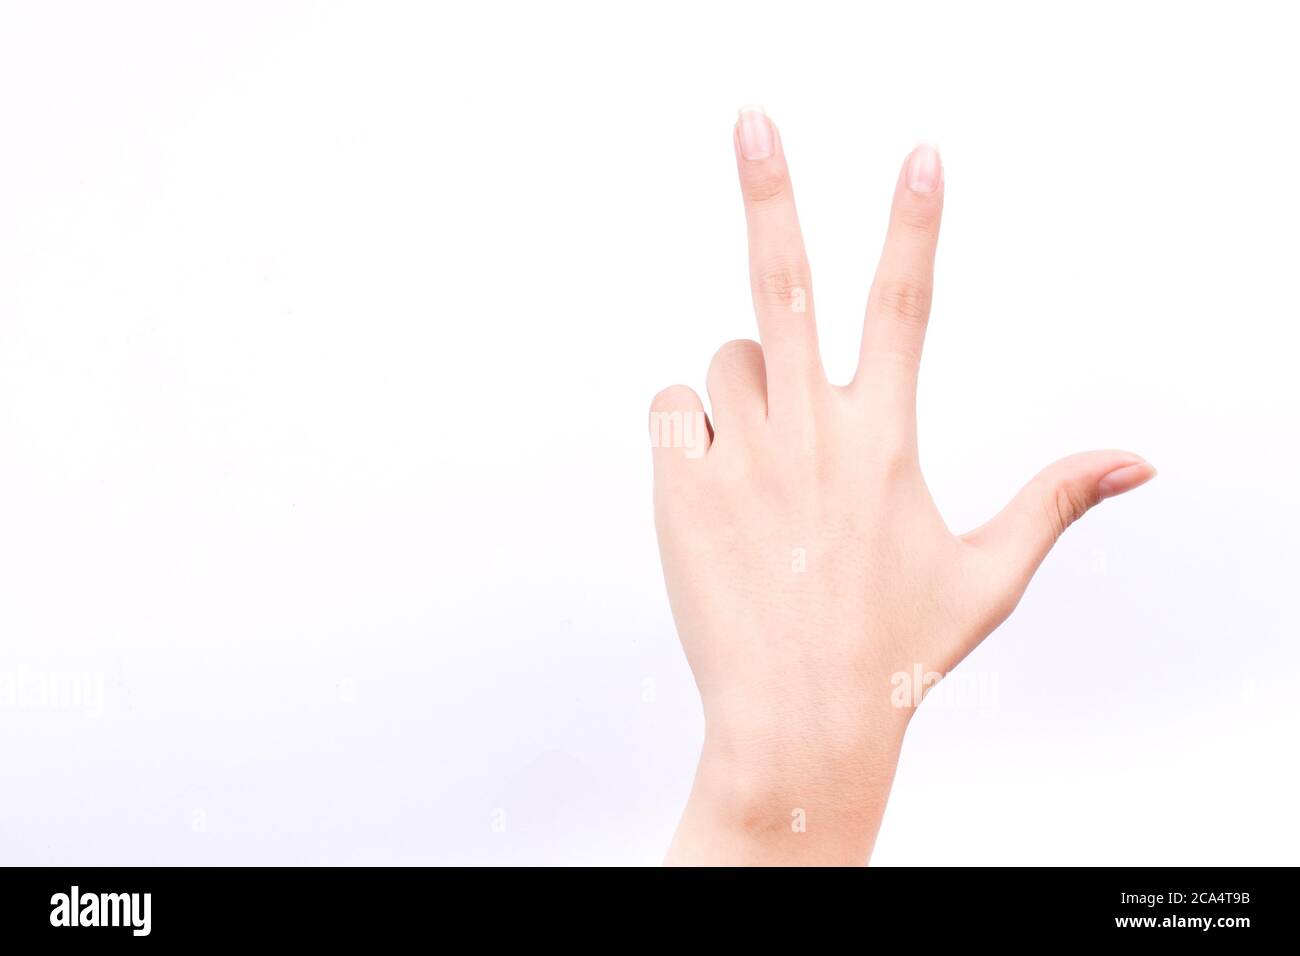 finger hand symbols isolated concept three fingers salute congratulation on white background Stock Photo